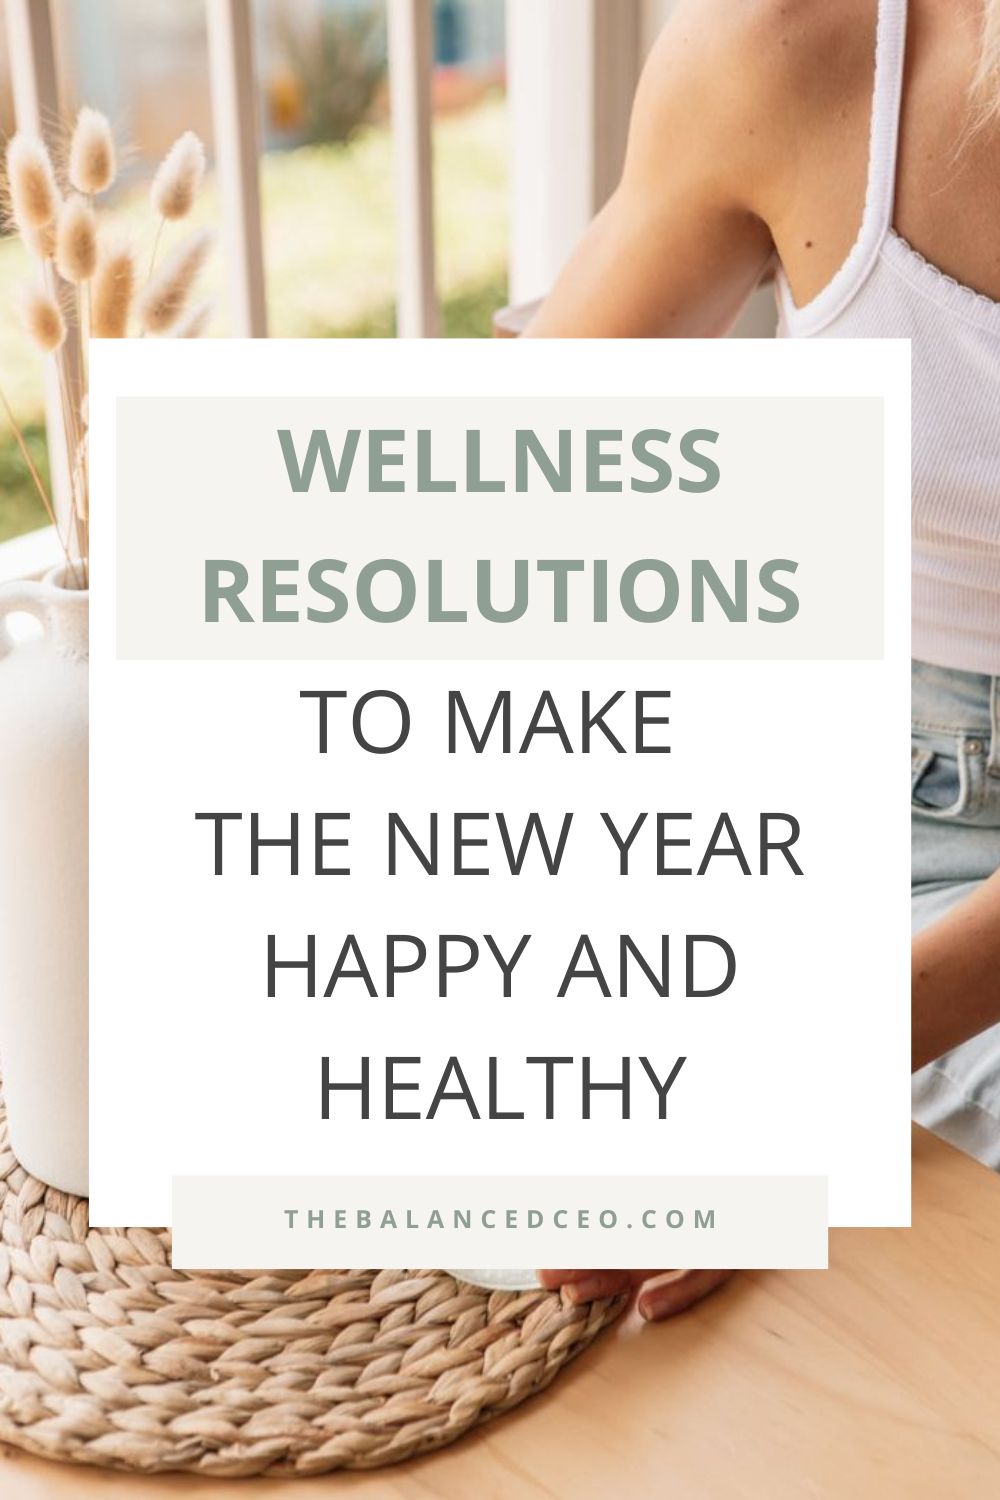 Wellness Resolutions to Make the New Year Happy and Healthy